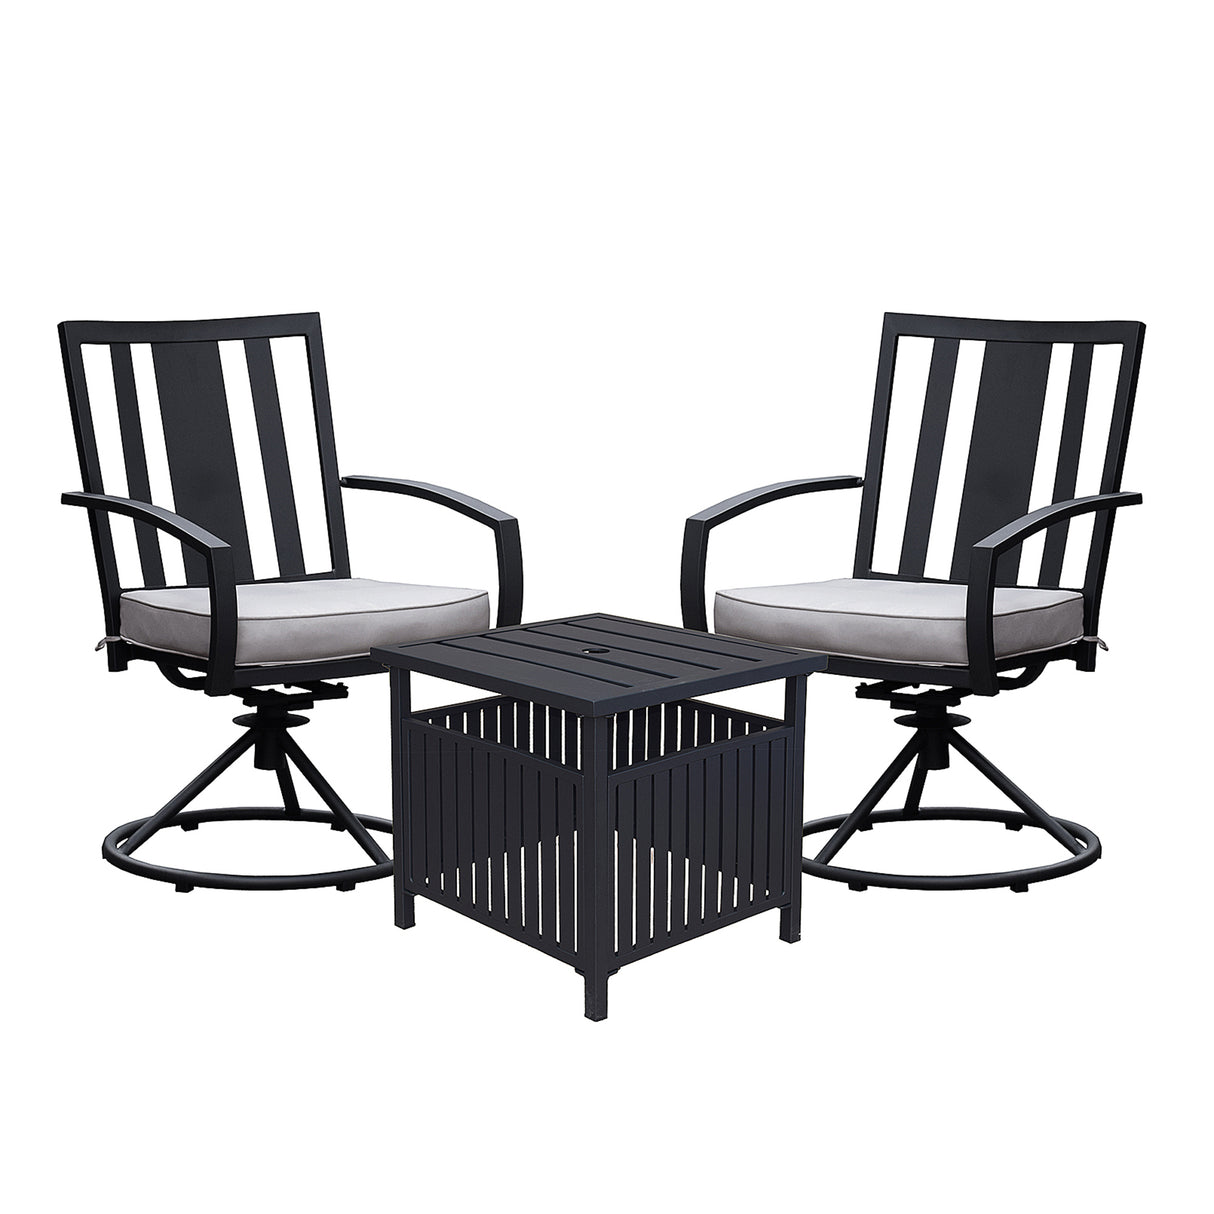 3 Piece Outdoor Patio Bistro Set, Swivel Chairs Set of 2 with Side Table and Cushions, Front Porch Furniture Set, Strong & Durable